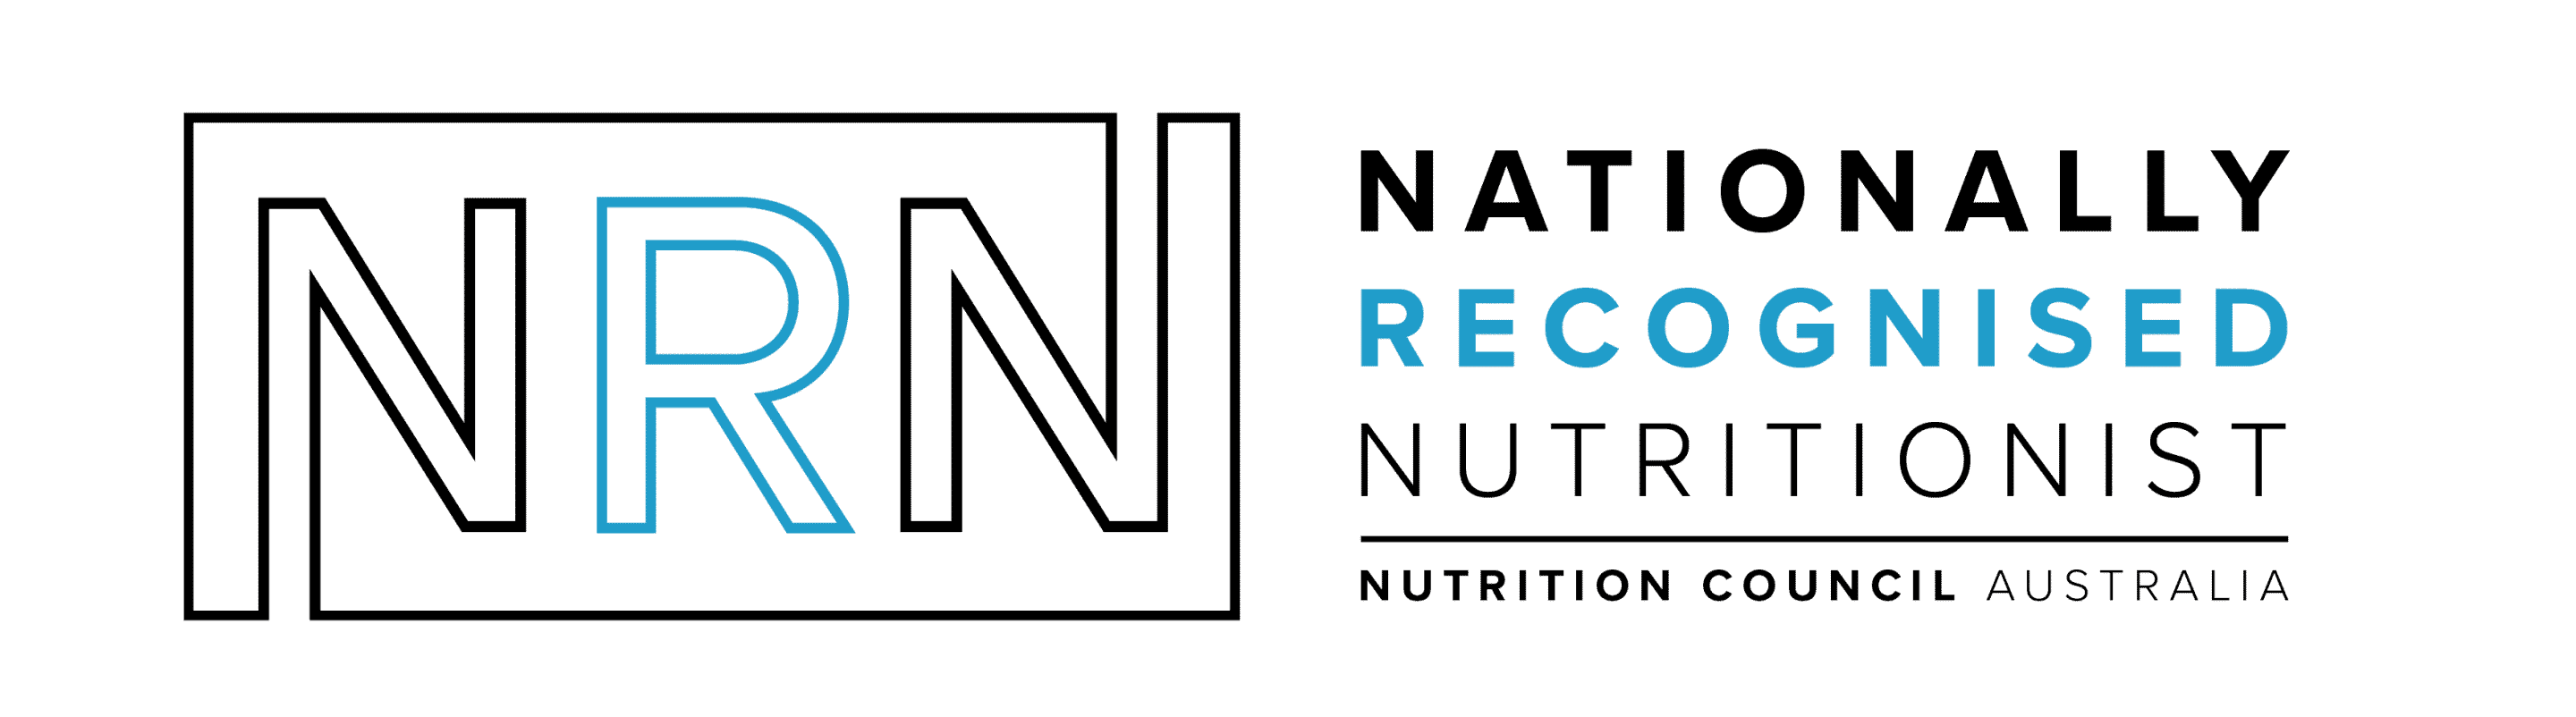 Nationally Recognised Nutritionist